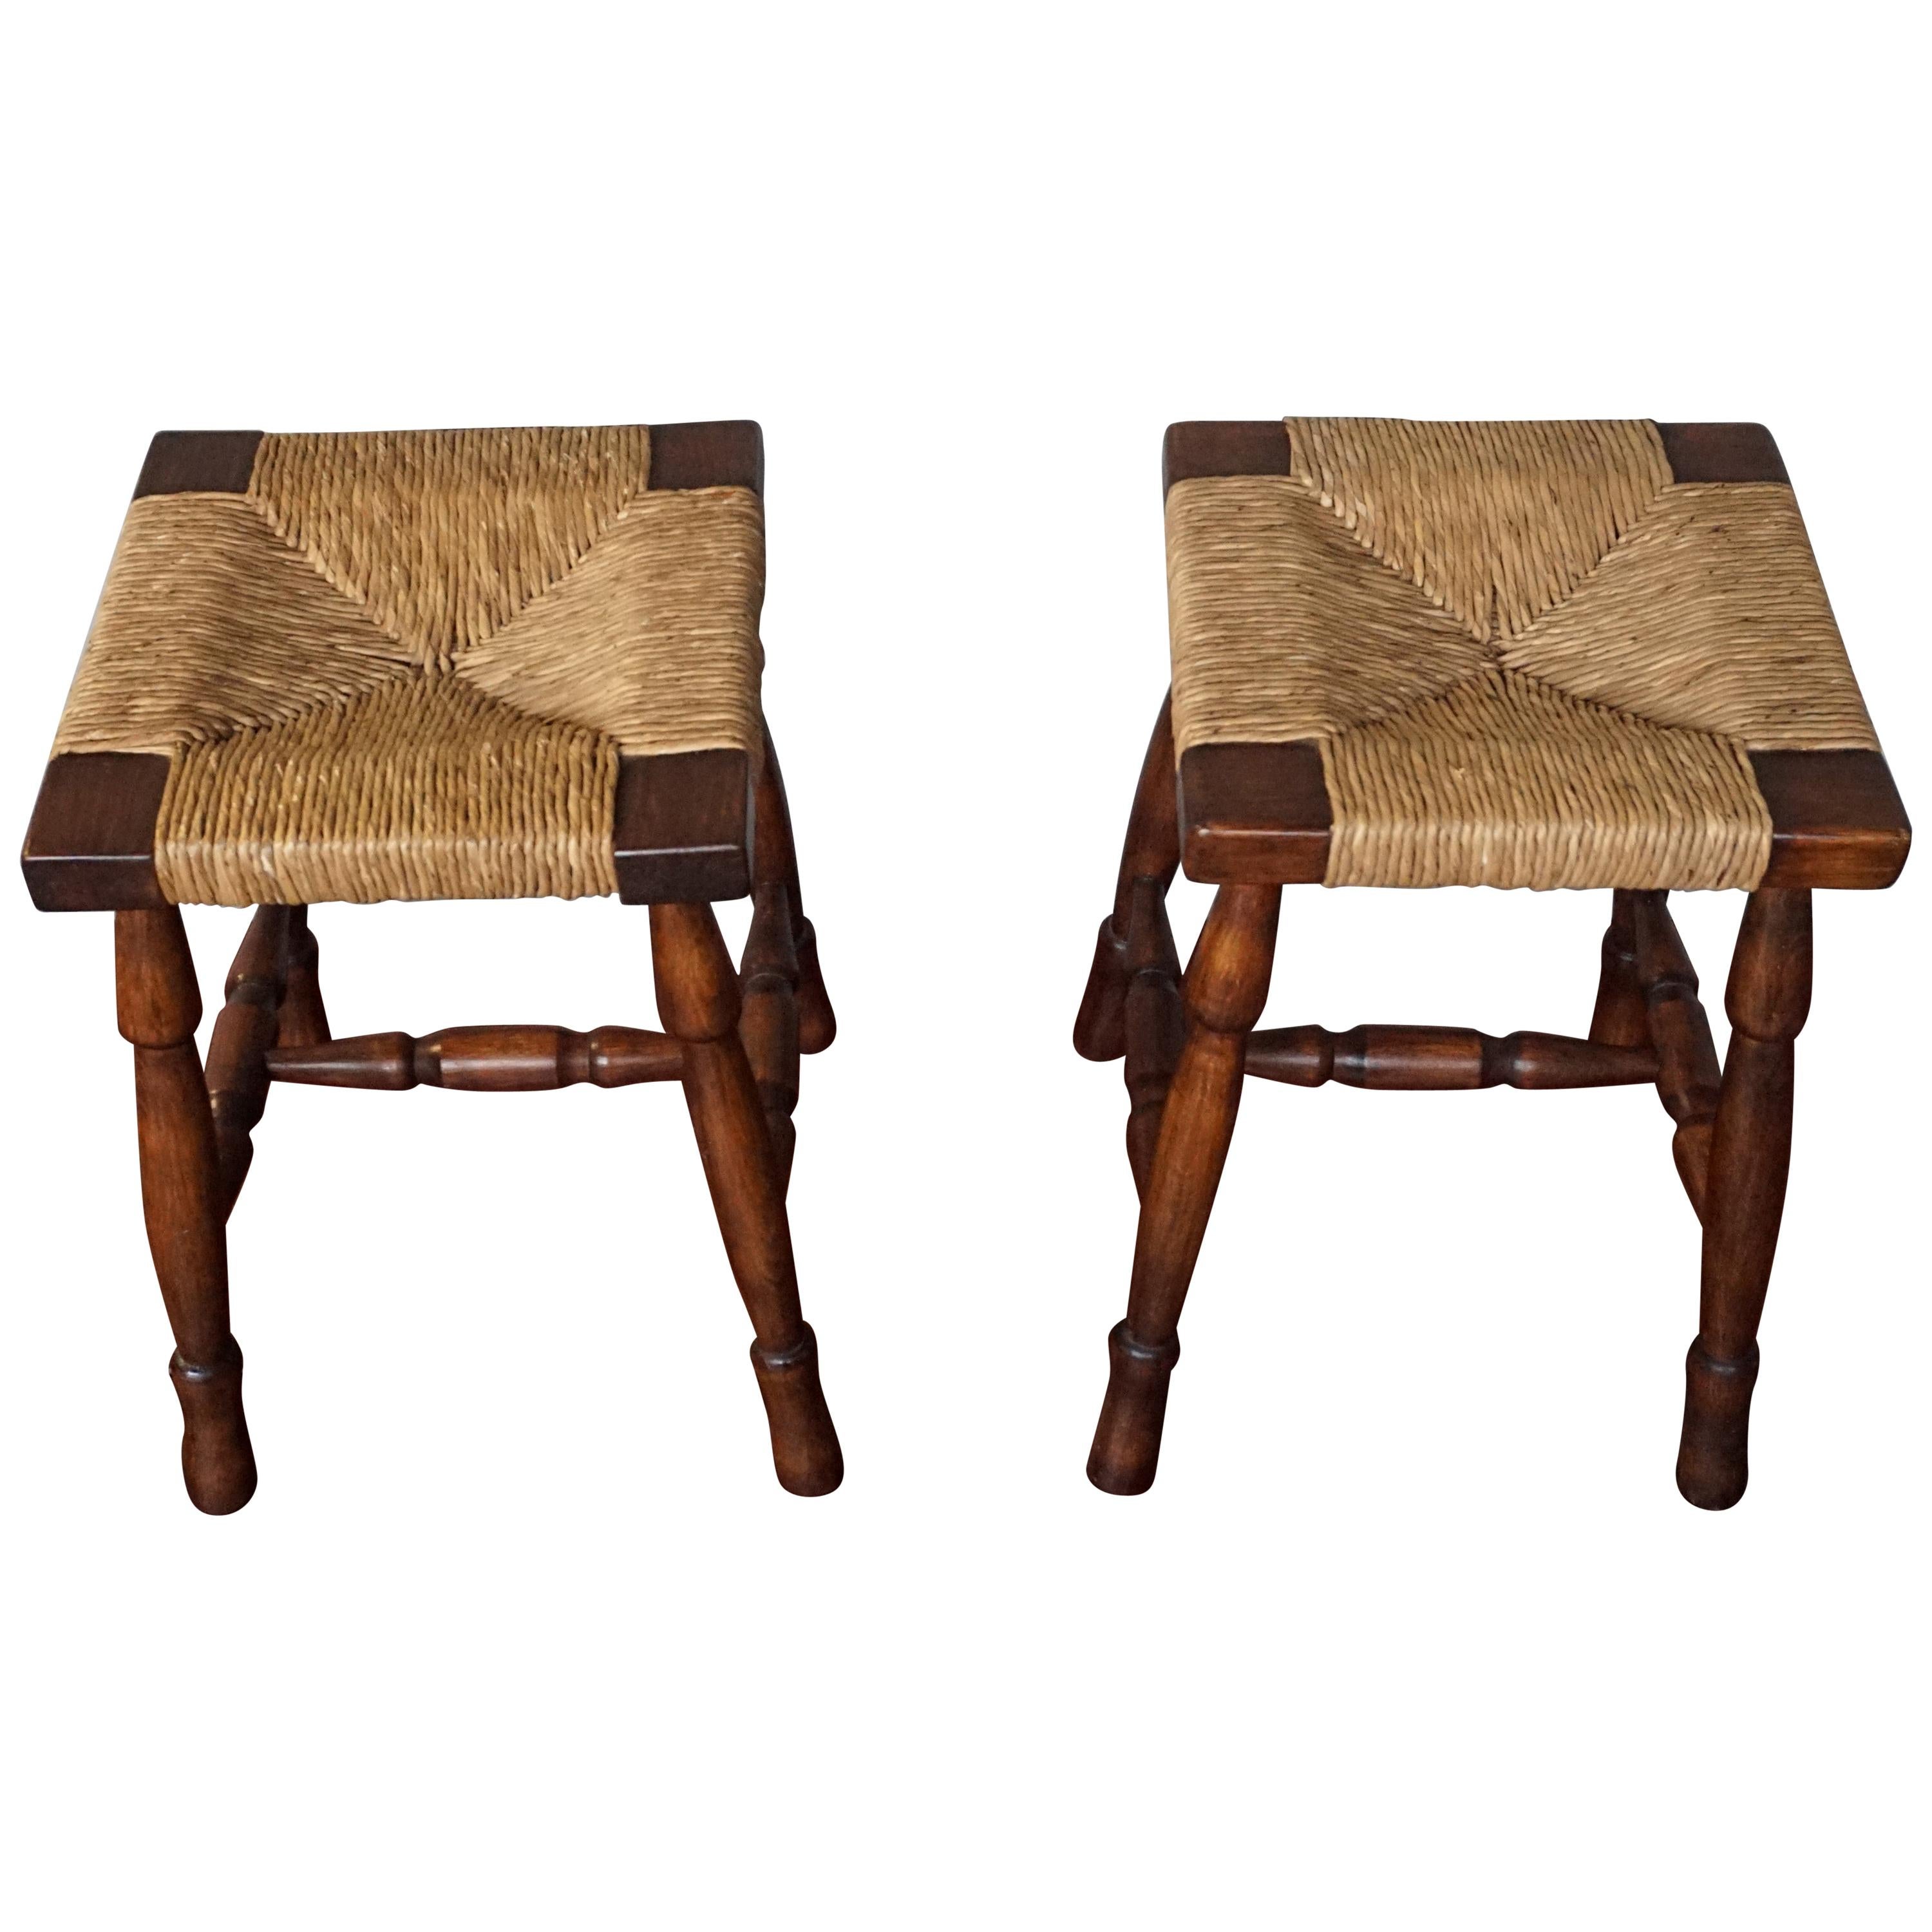 Vintage Pair of Handcrafted Wood and Rush Seat Country House / Provencial Stools